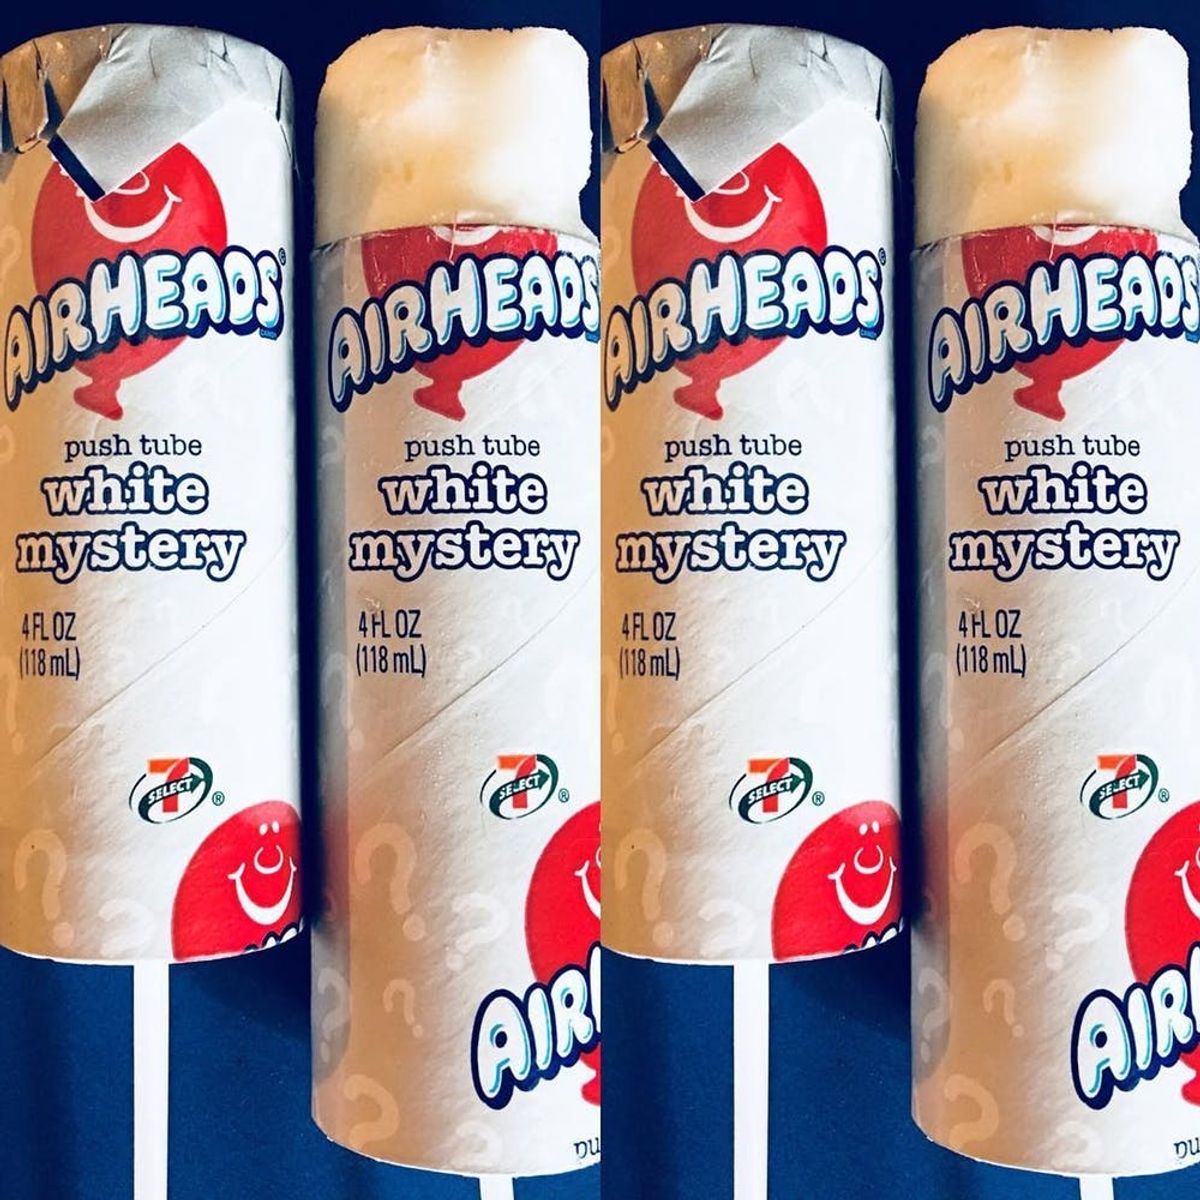 7-Eleven Frozen Airheads White Mystery “Push Tubes” Let You Relive Your ’90s Childhood